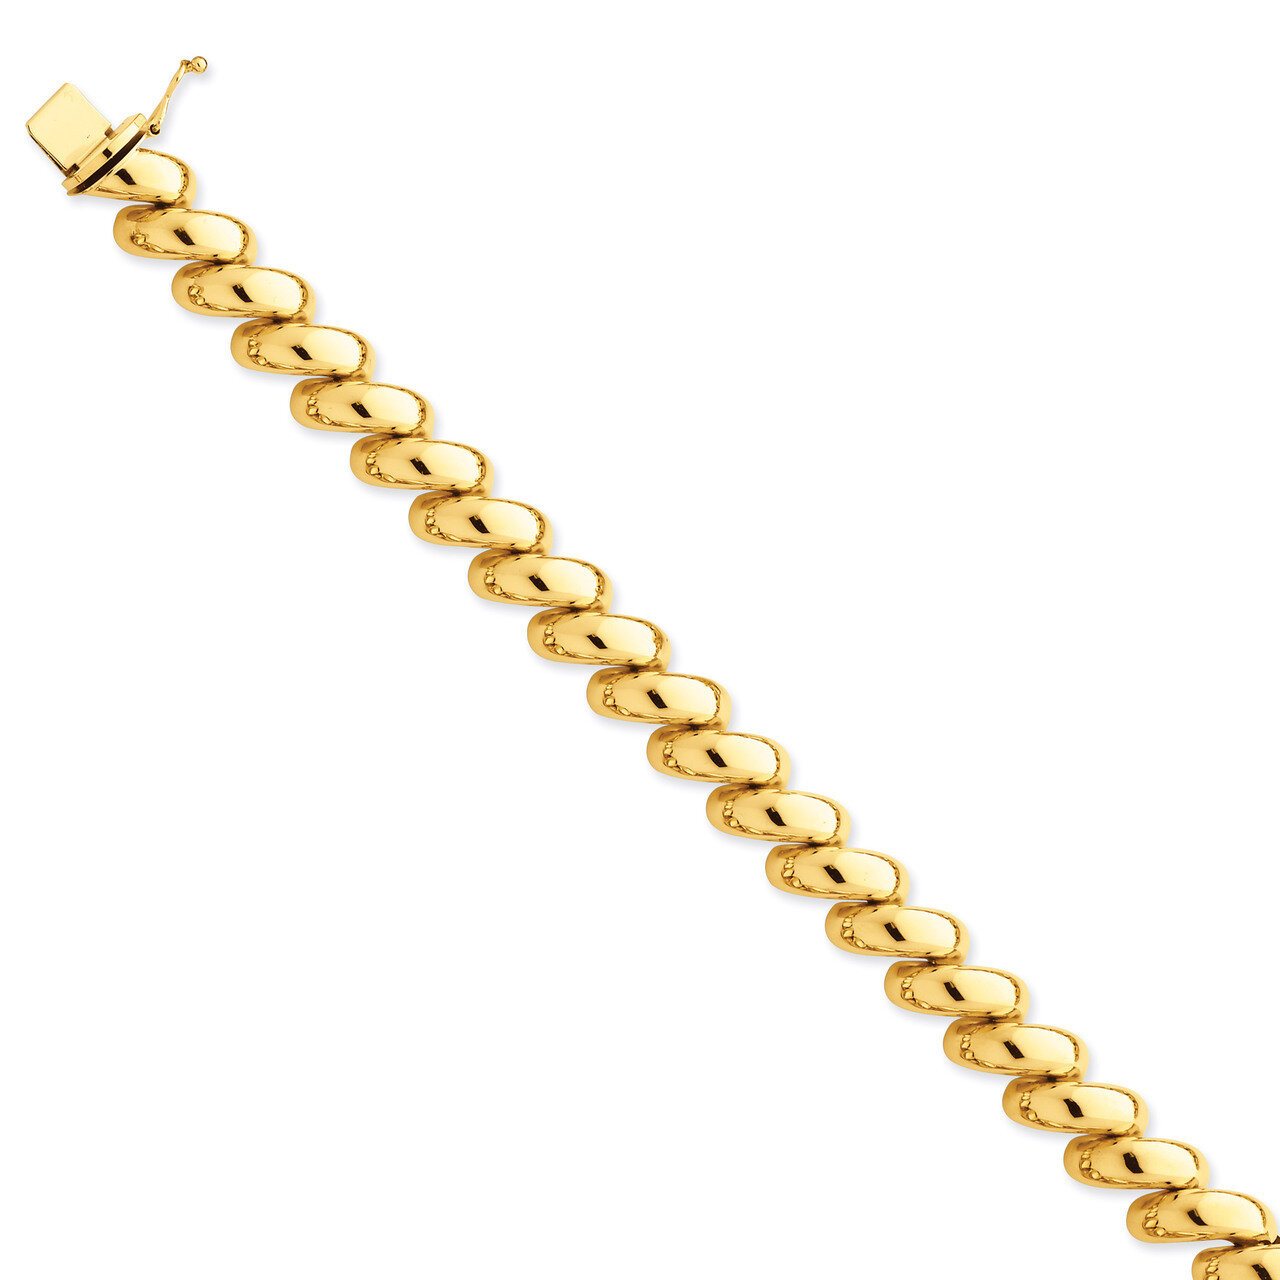 San Marco Necklace 17 Inch 14k Gold Polished SM20-17